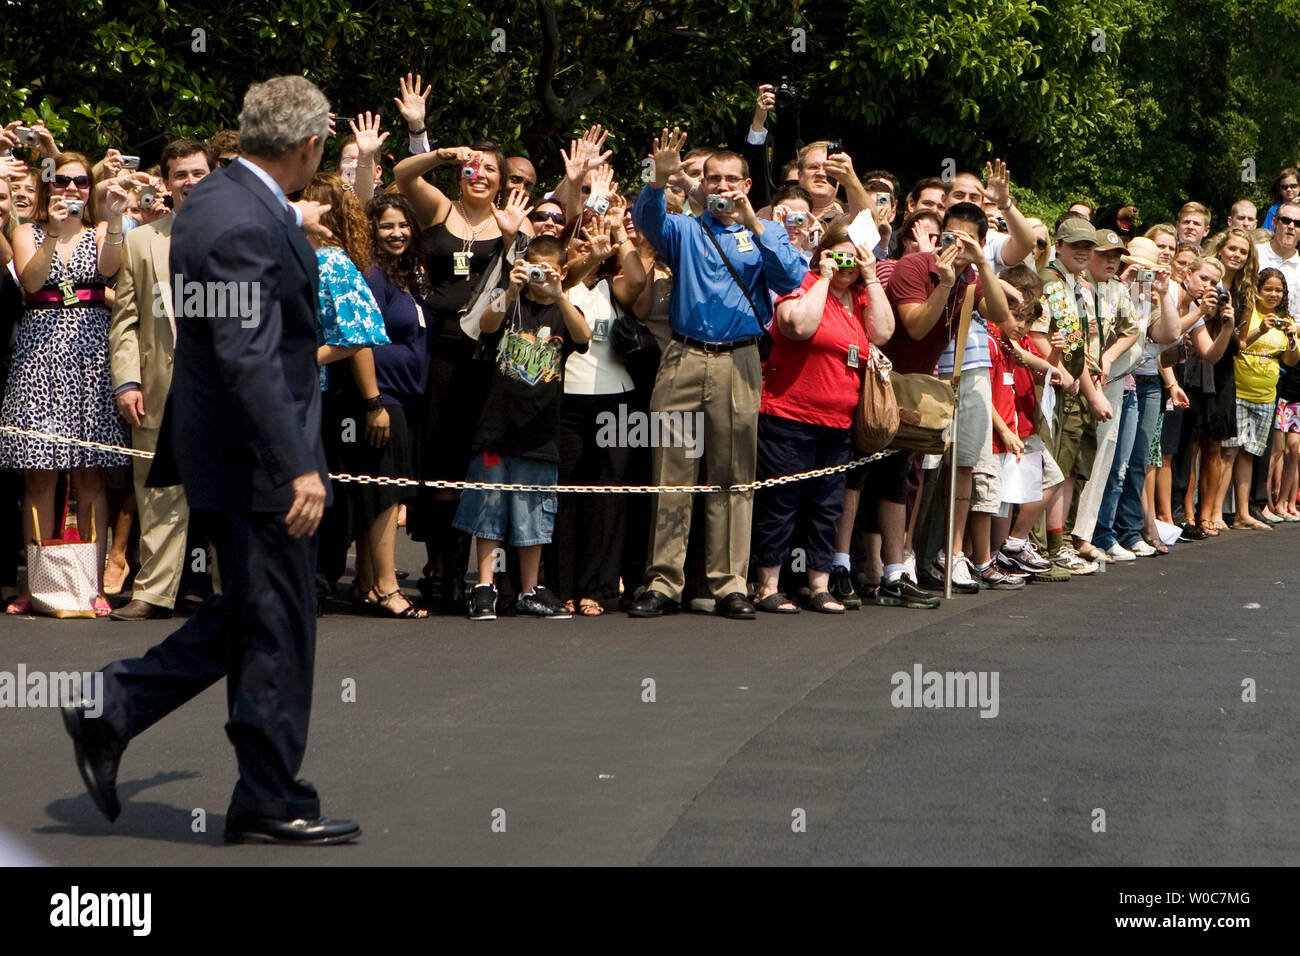 U.S. President George W. Bush waves to members of the public as he departs from the White House in Washington on June 6, 2008. President Bush is going to Camp David for the weekend. (UPI Photo/Patrick D. McDermott) Stock Photo